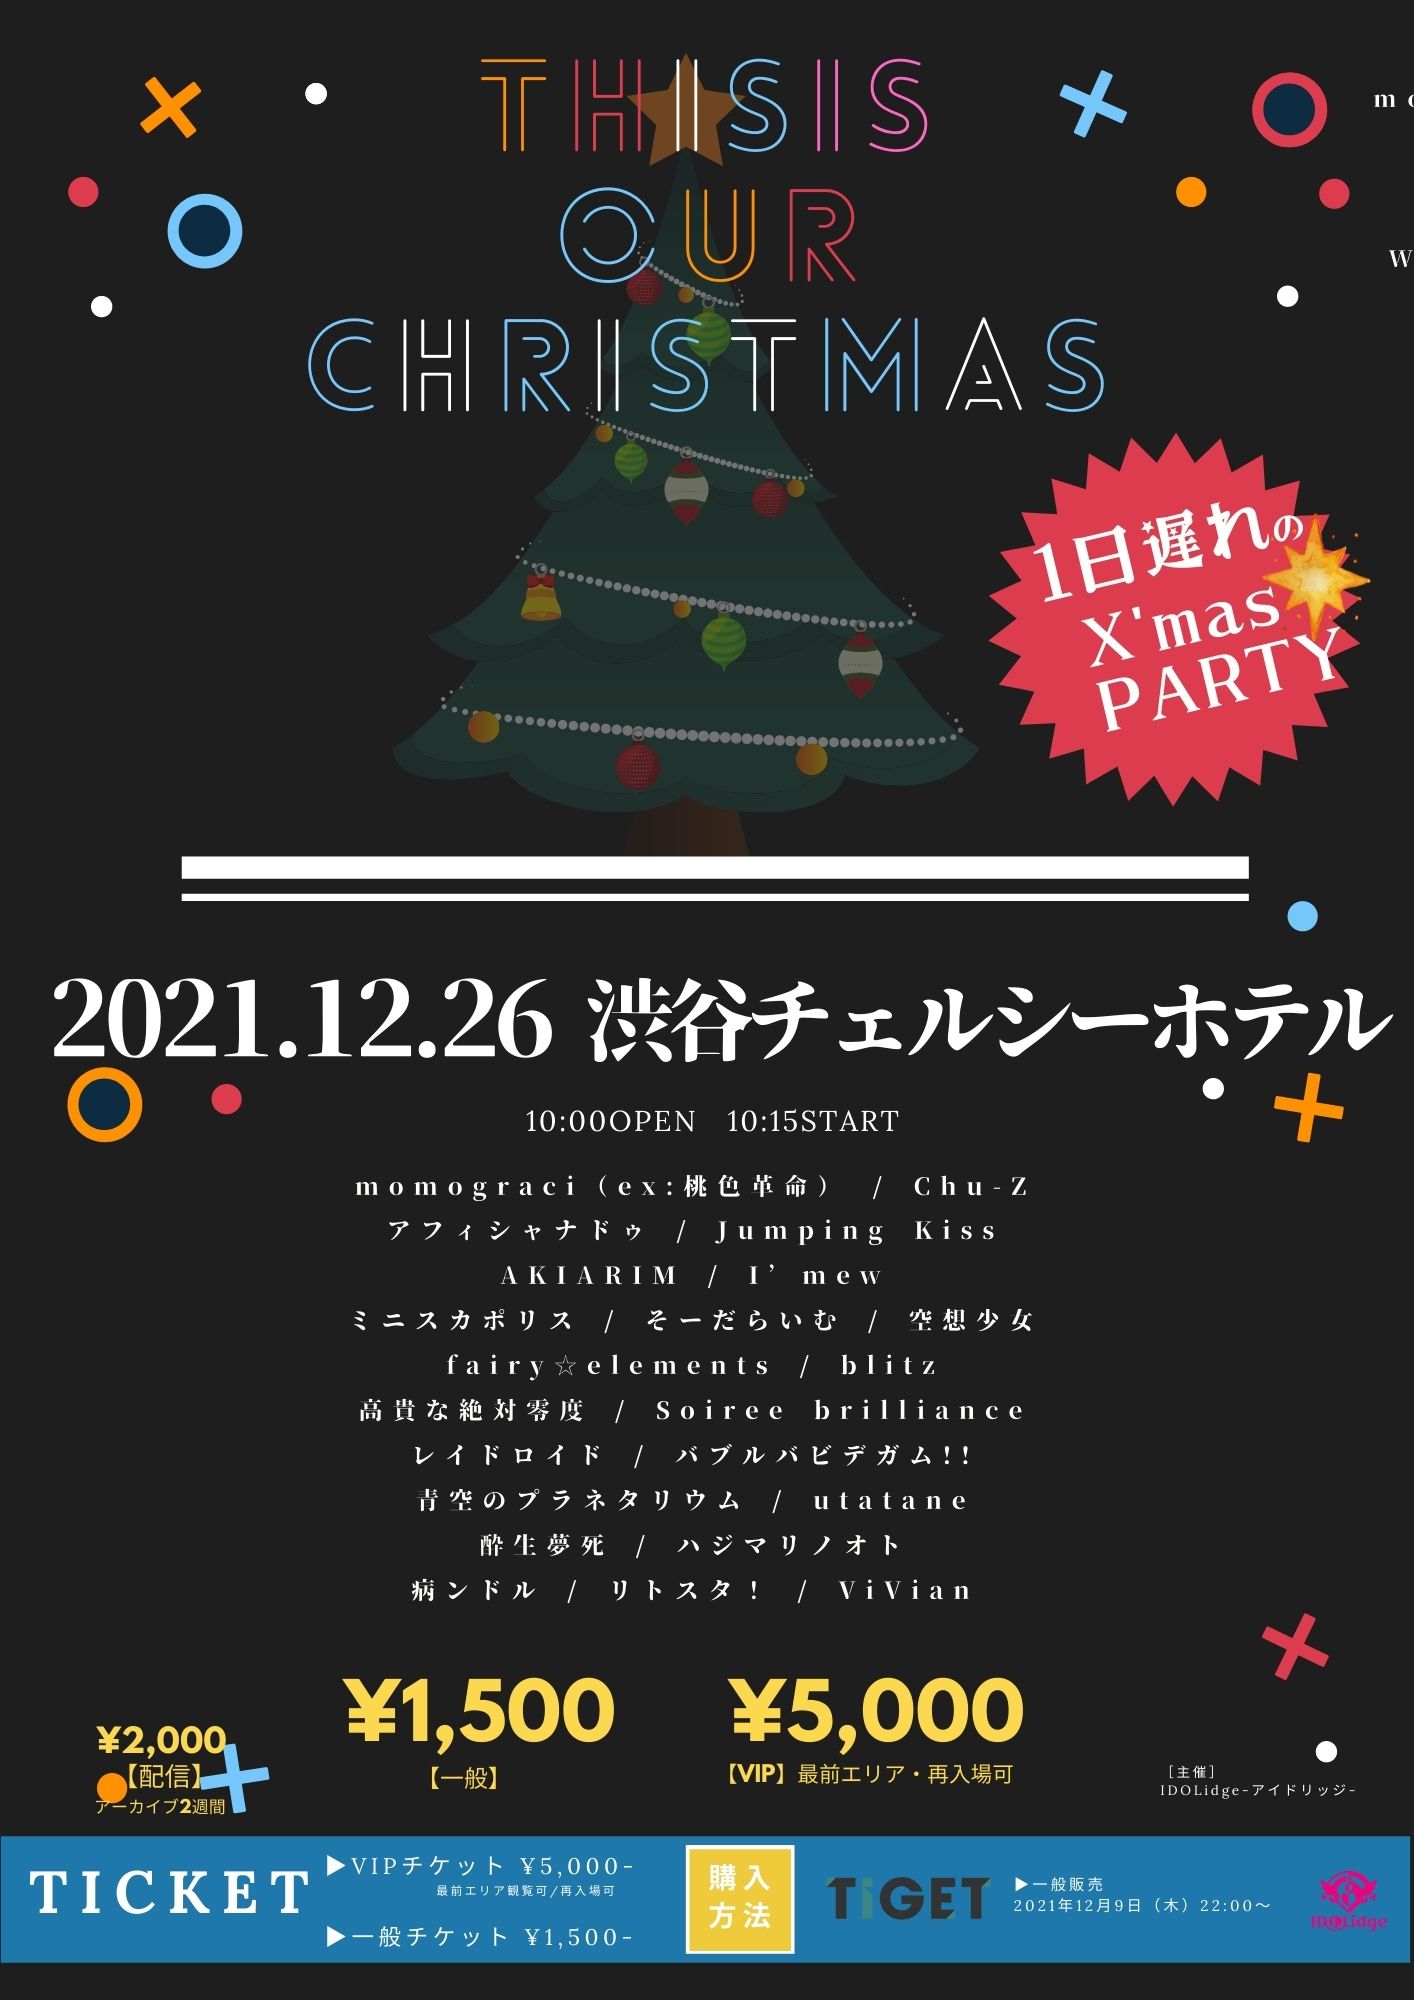 THIS is OUR CHRISTMAS～1日遅れのX'mas PARTY～ タイムテーブル